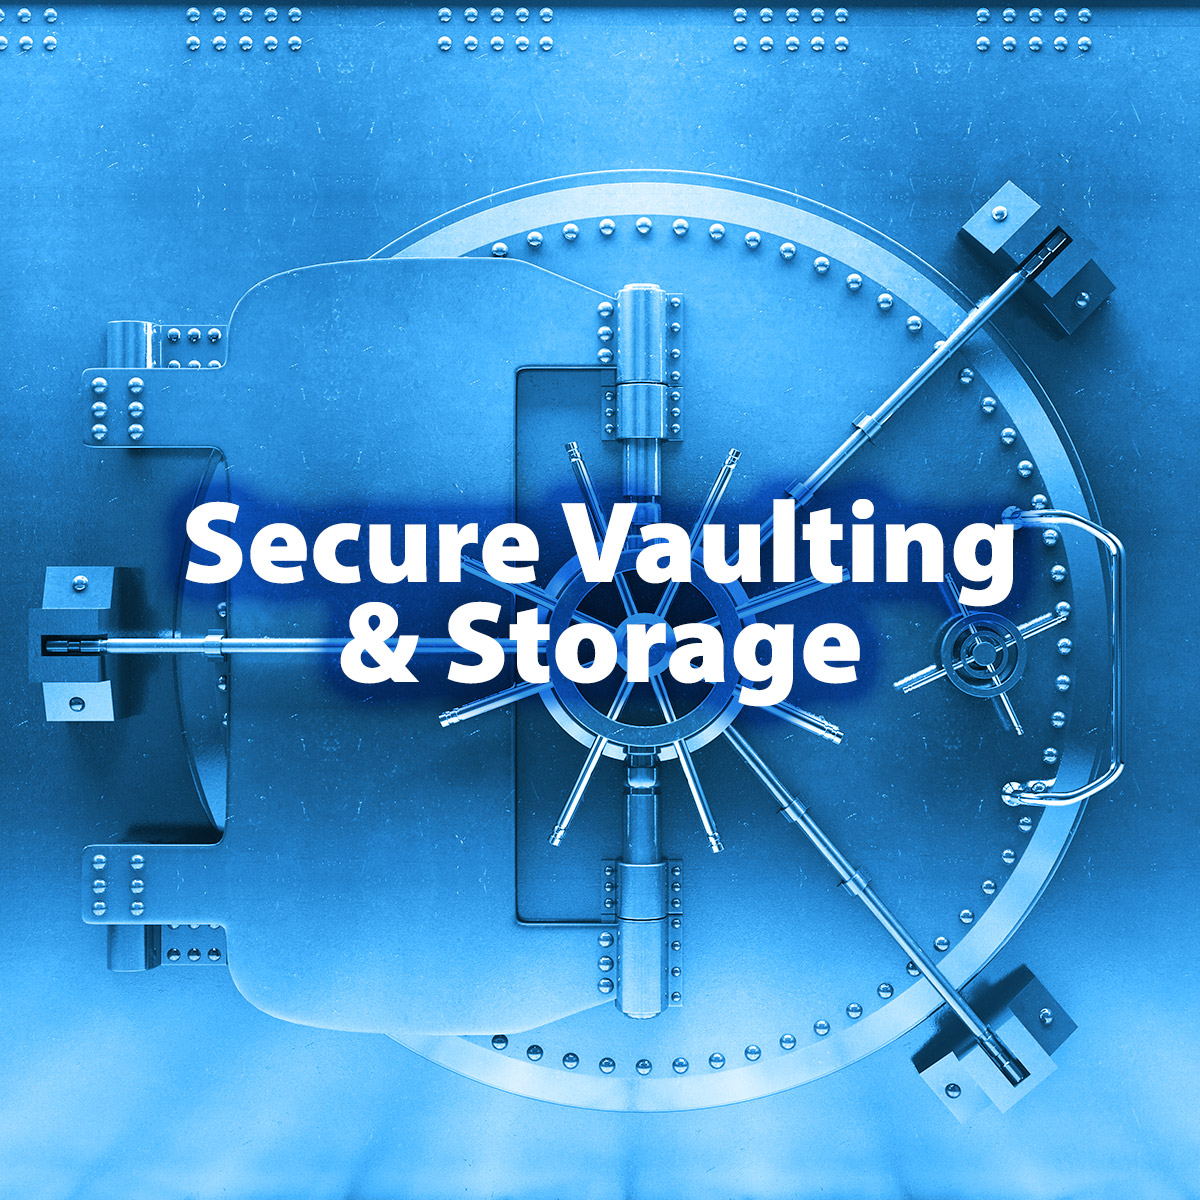 Secure Vaulting and Storage